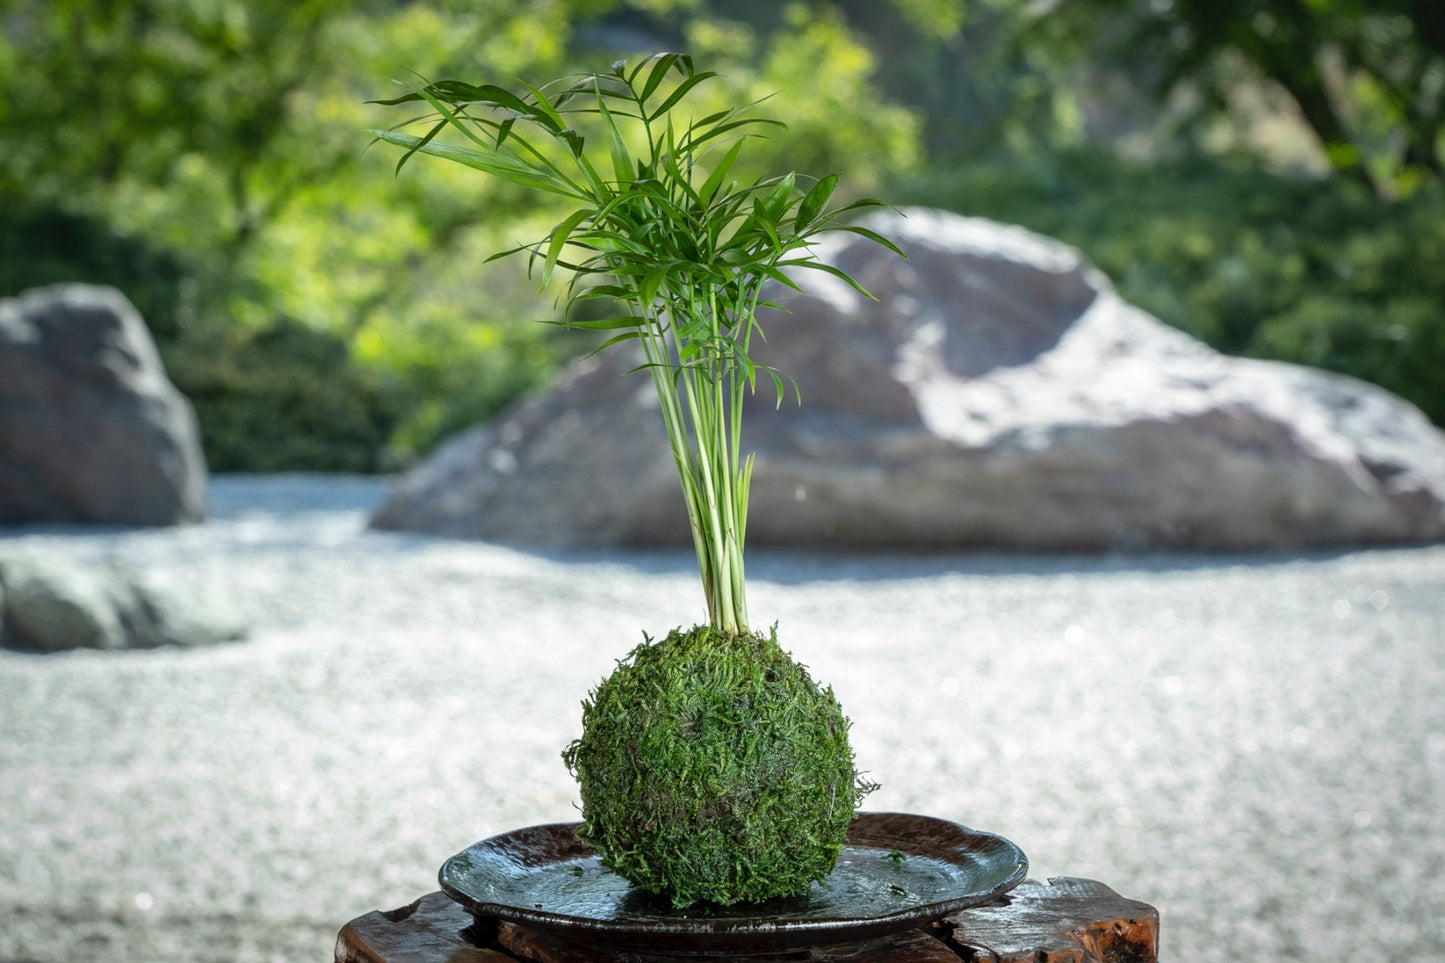 Good for Eco Cube Air! Mini Parlor Palm Kokedama - Moss ball, Japanese Living Art, a spin off of Bonsai, Japanese botanical technique.